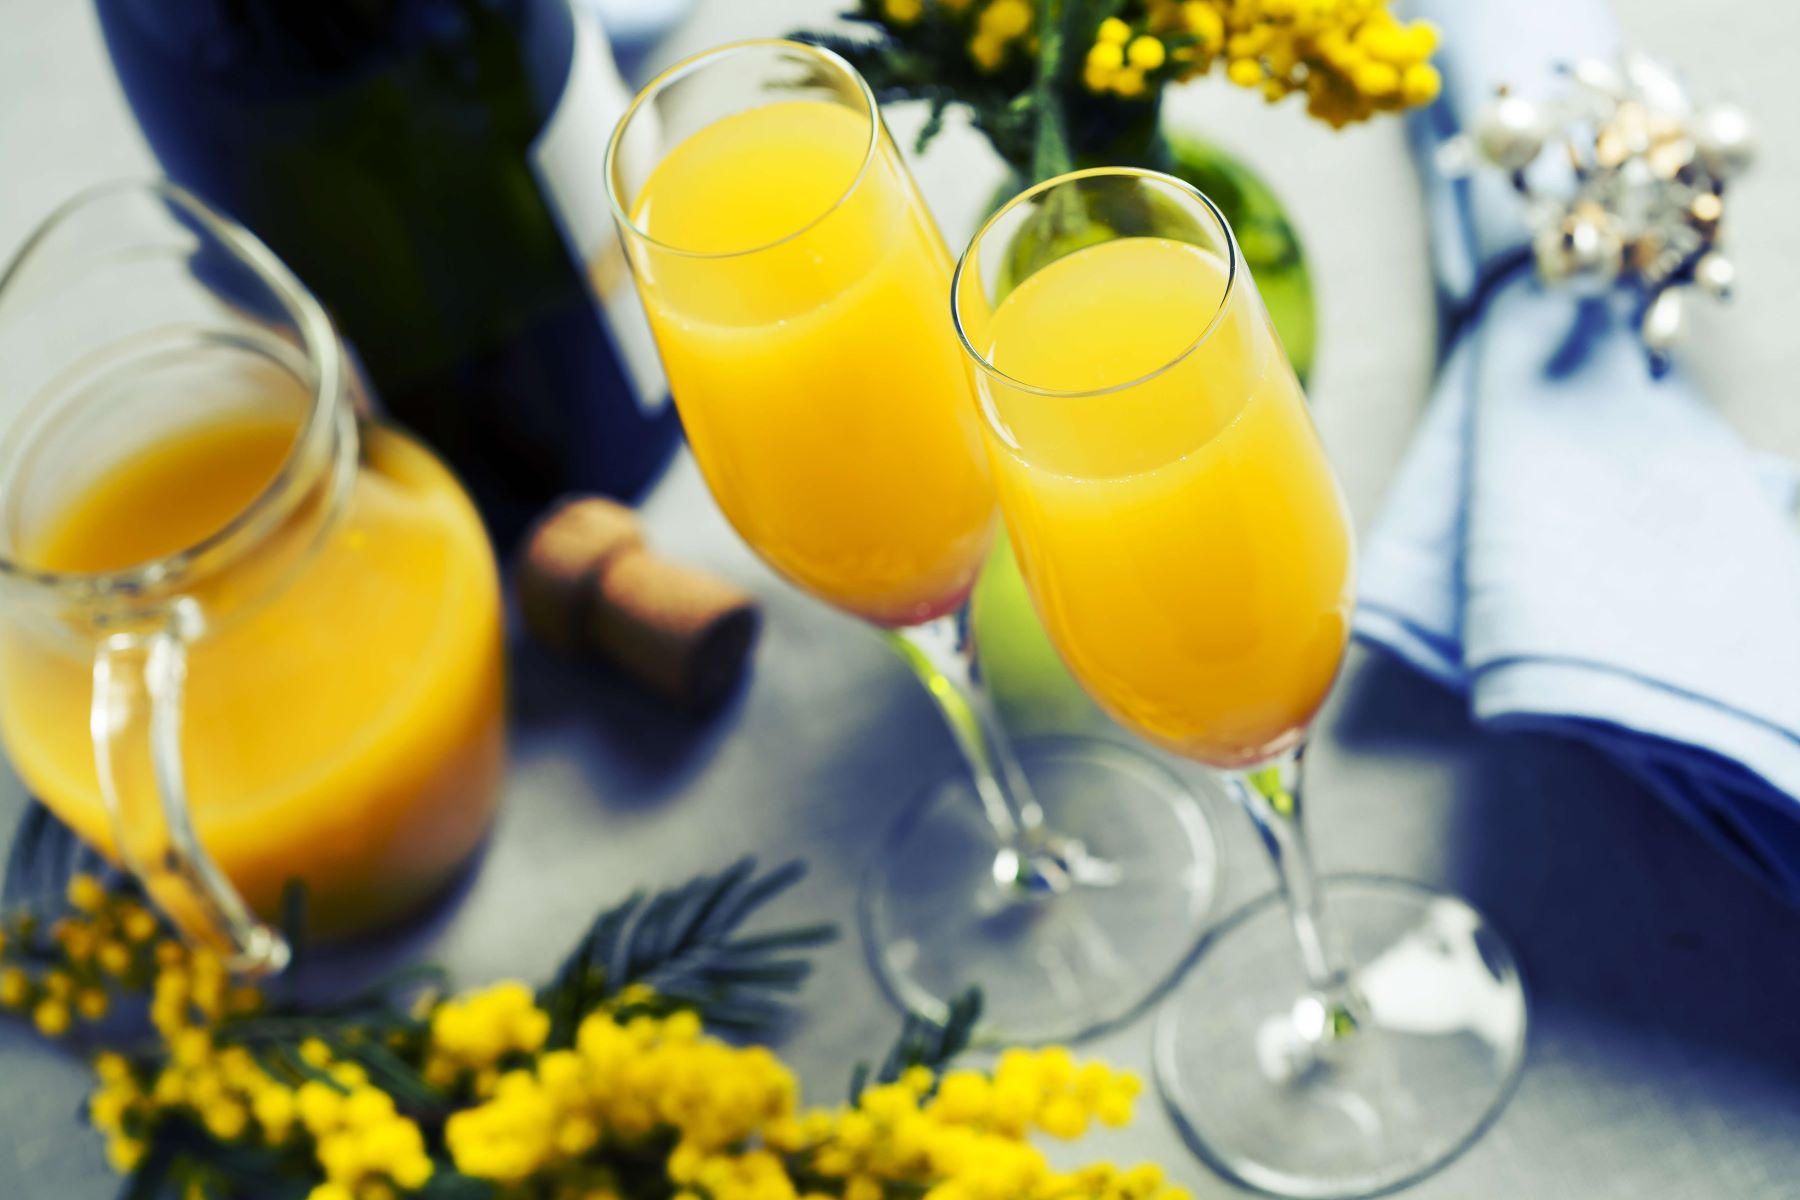 11-facts-about-national-mimosa-day-may-16th